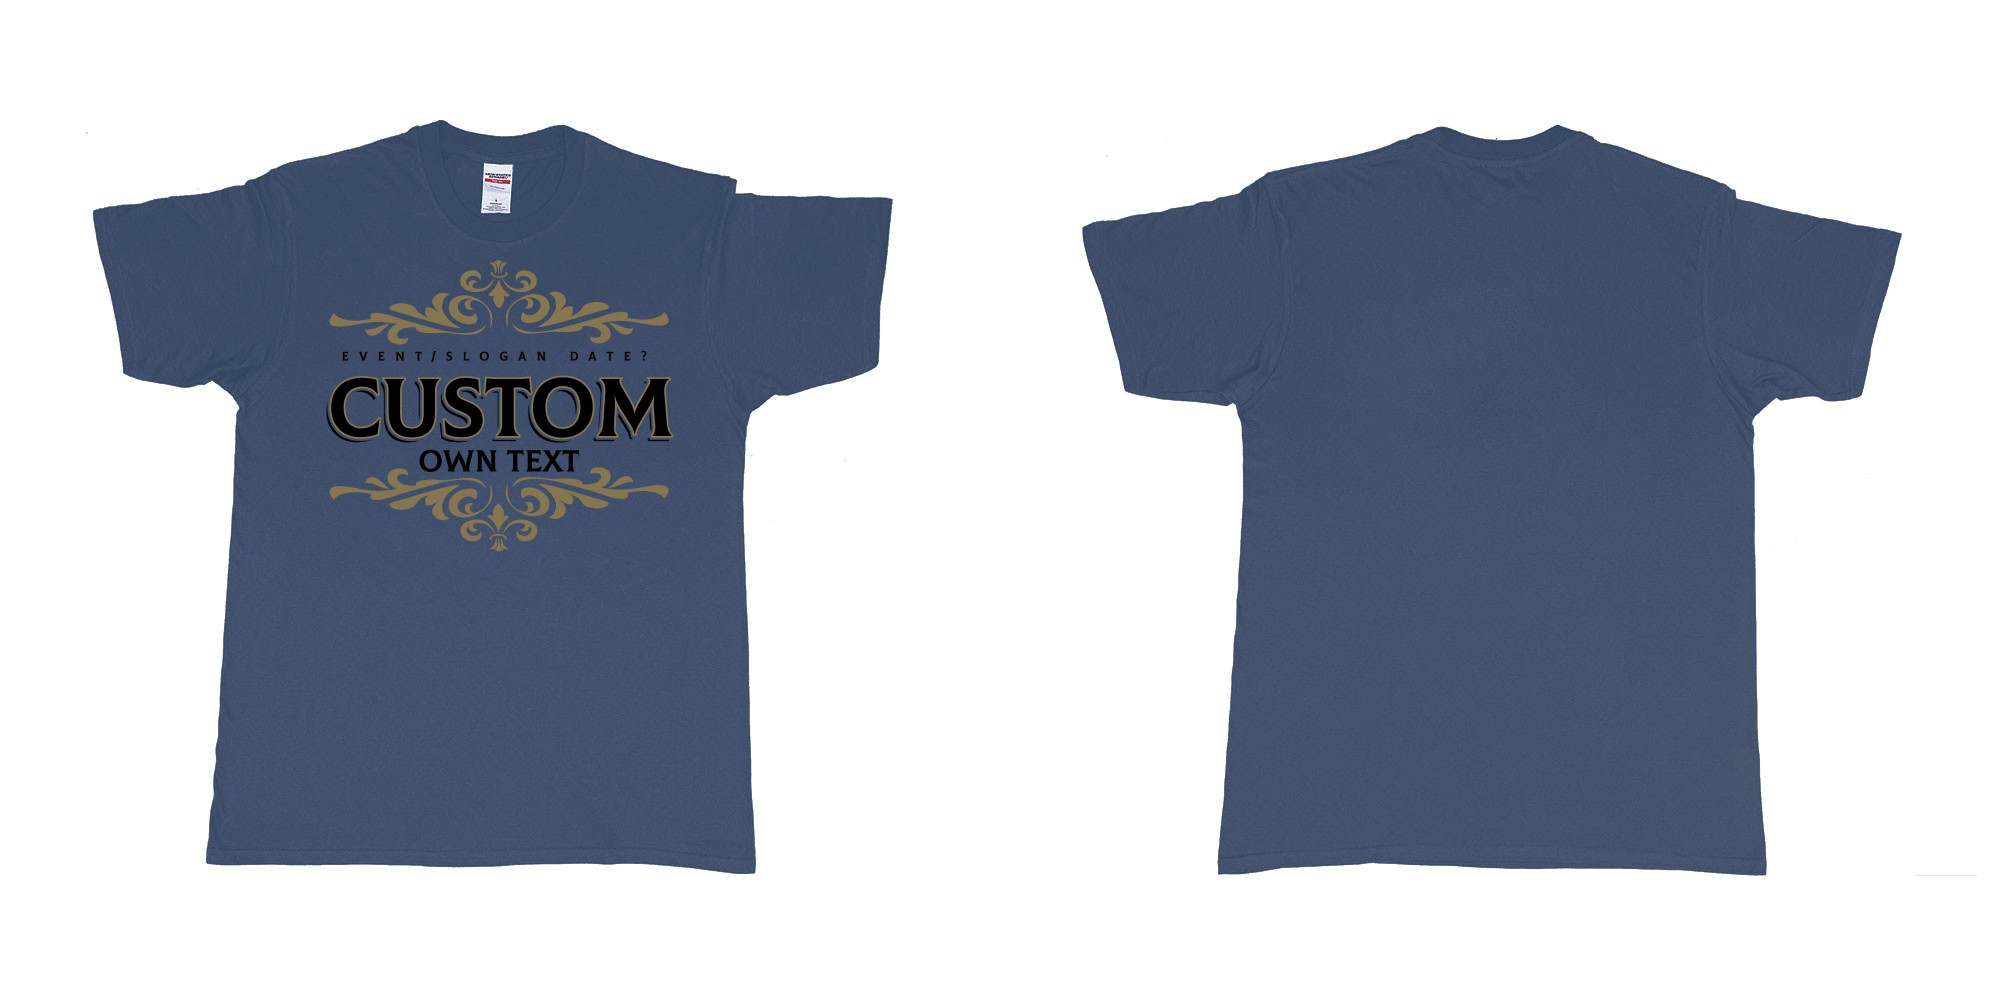 Custom tshirt design el diamante del cielo tequila elegant logo in fabric color navy choice your own text made in Bali by The Pirate Way